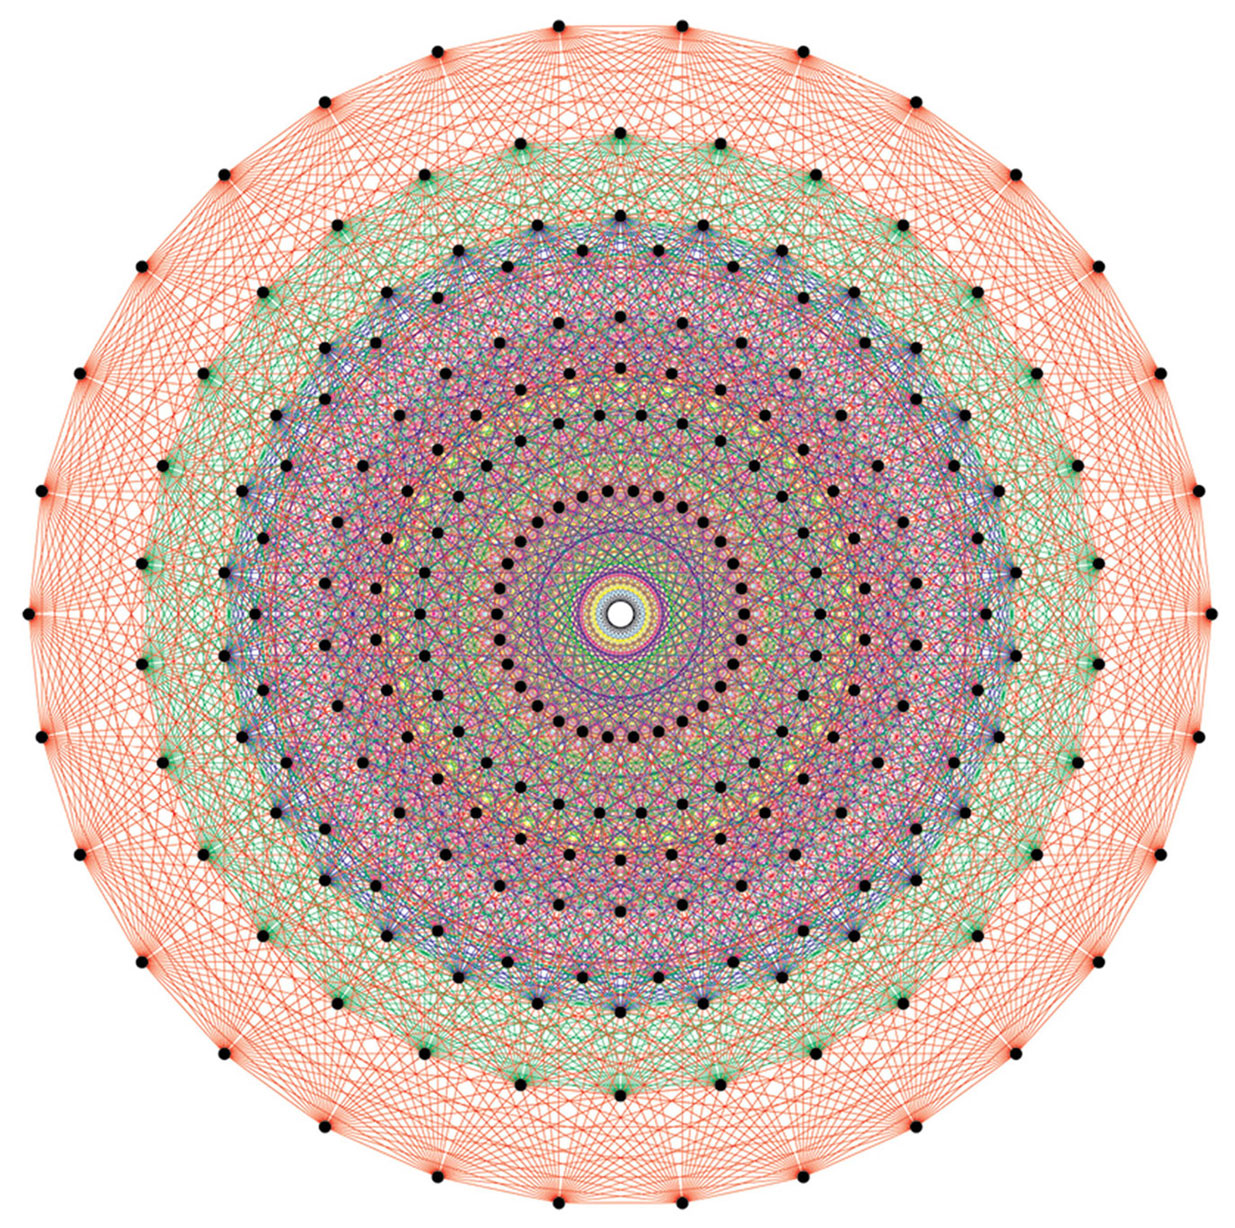 A computer representation of the exceptional finite group known as E8, a smaller cousin of the Monster.